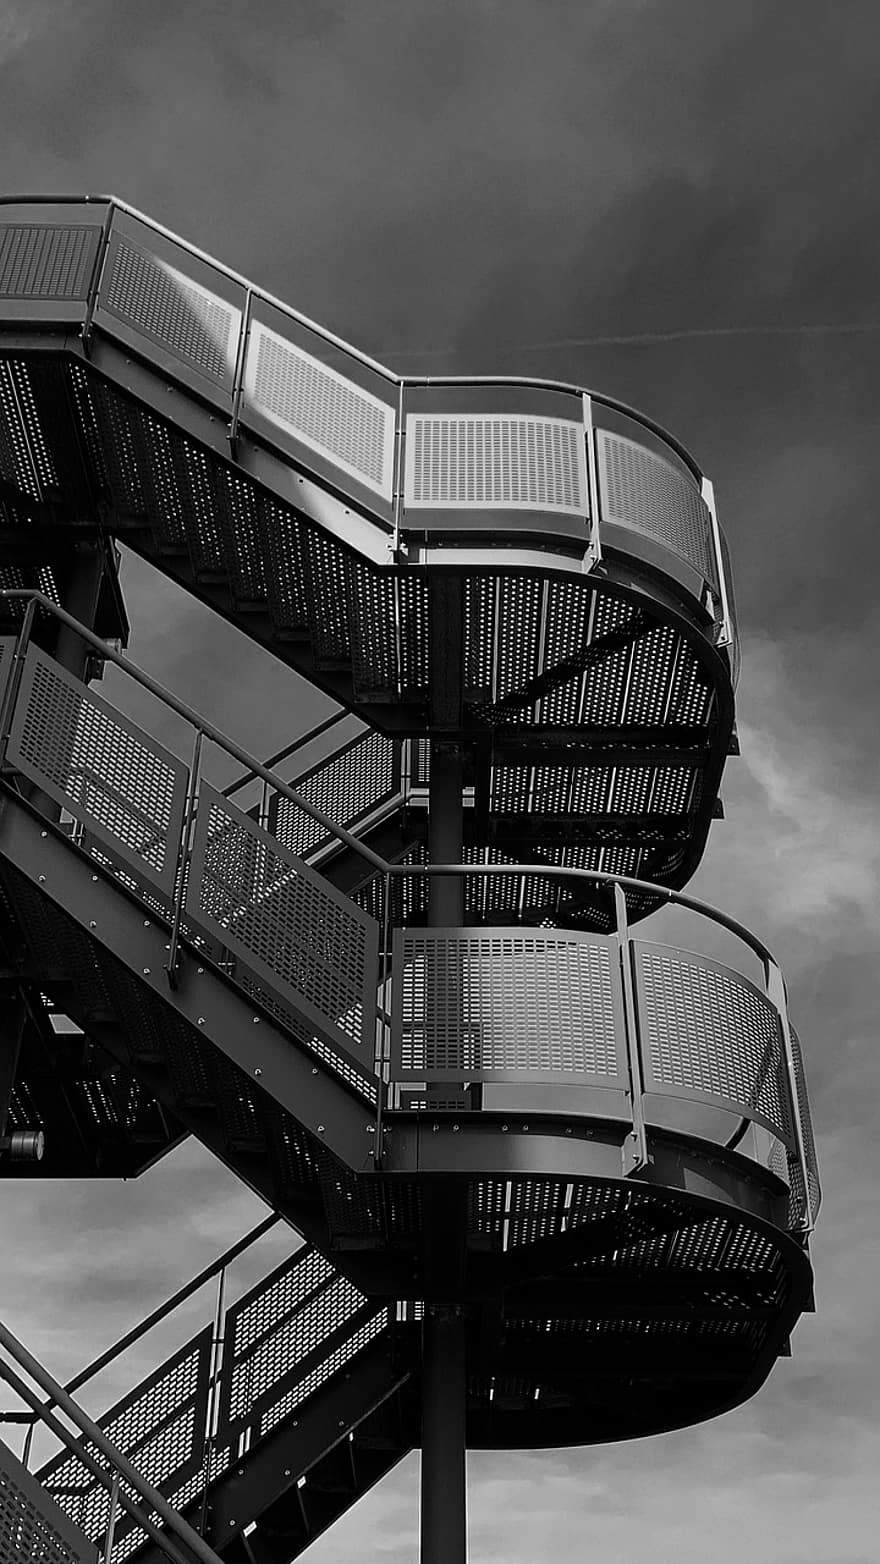 Stairs, Building, Architecture, Stairwell, Staircase, Steps, Steel, metal, black and white, built structure, modern